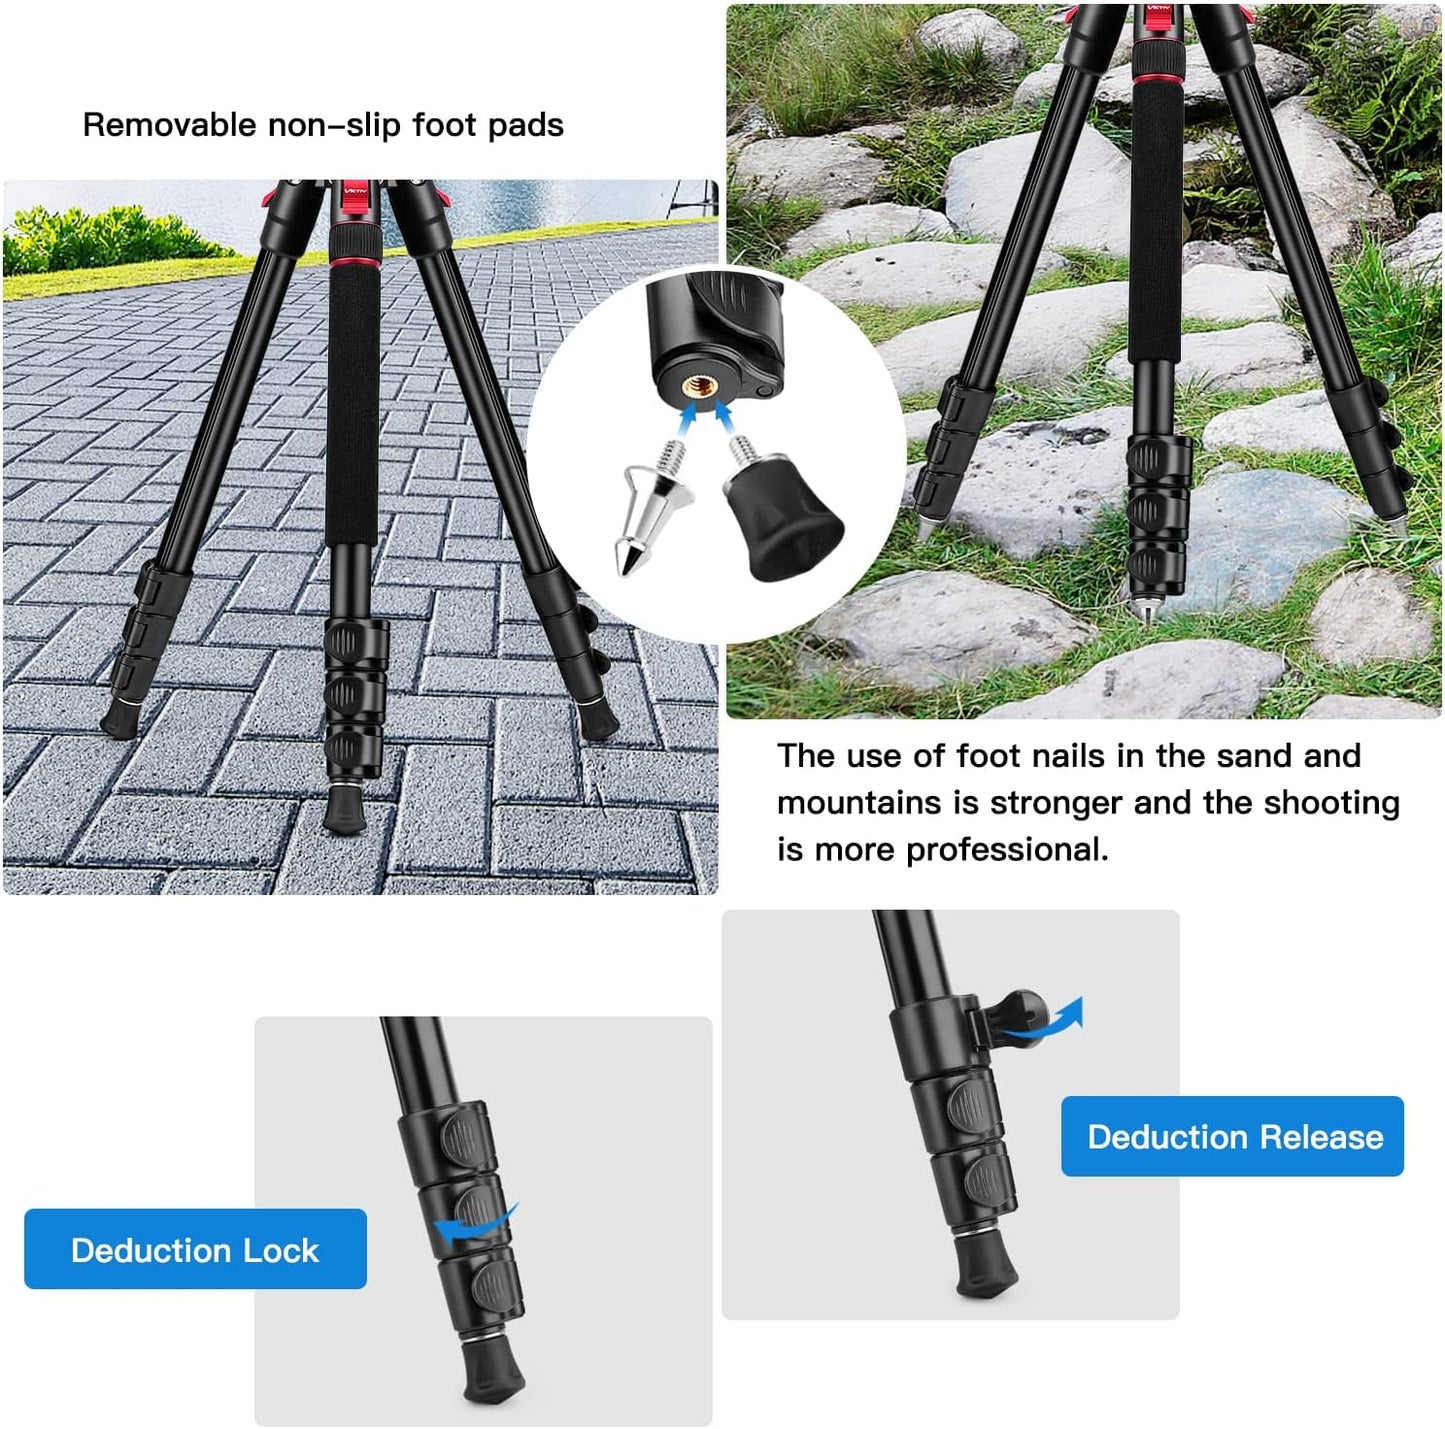 Tripod Camera Tripods, 72" Video Tripod with Fluid Head, Aluminum Heavy Duty Tripod with Carry Bag, Professional Camera Tripods & Monopods, Compatible with Video Camera, DSLR, Camcorder